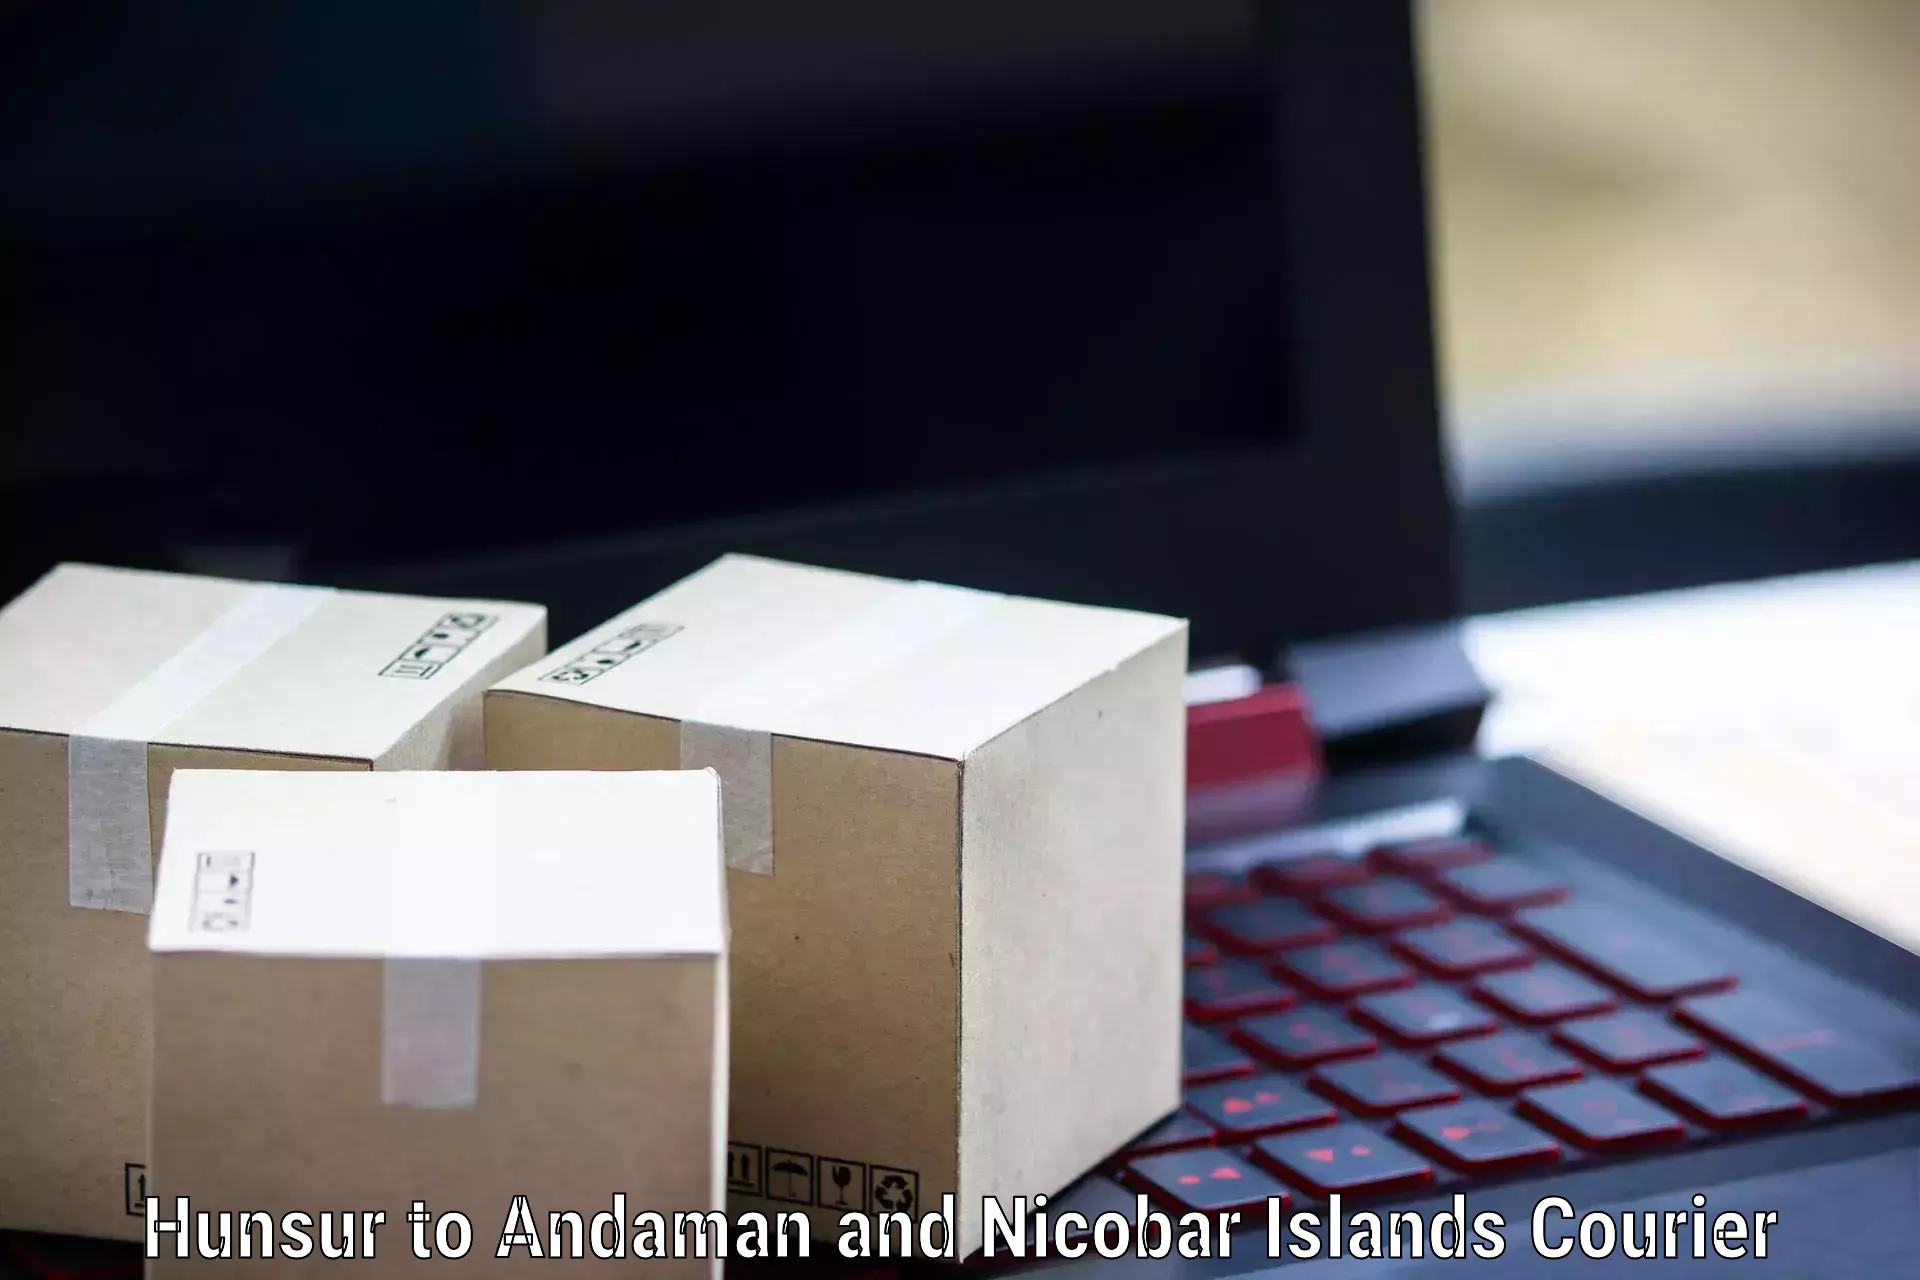 Customized delivery options Hunsur to Andaman and Nicobar Islands